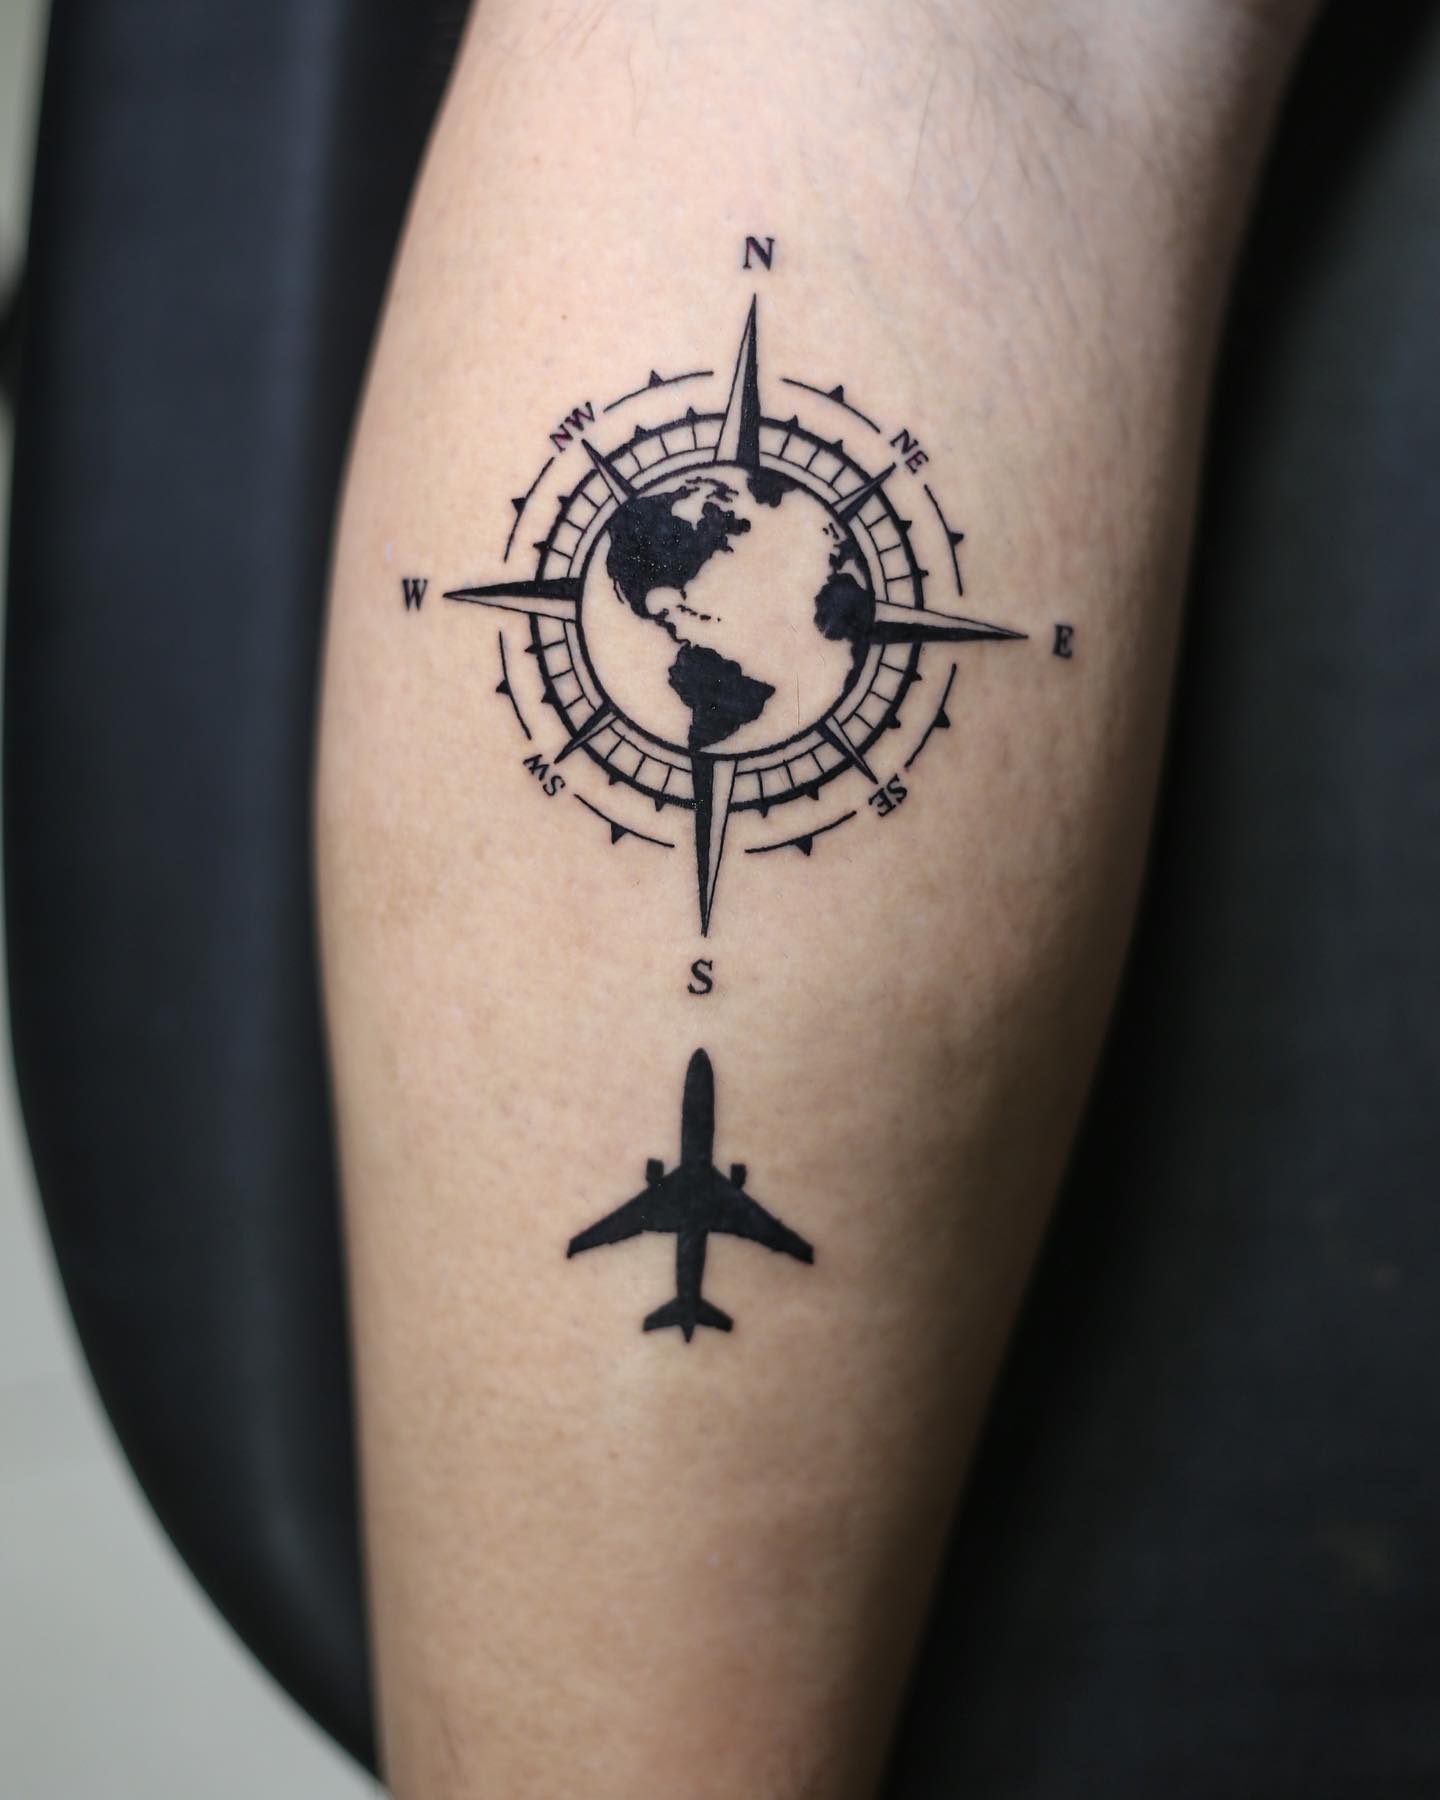 Bright Airplane Tattoo With Compass Idea 1